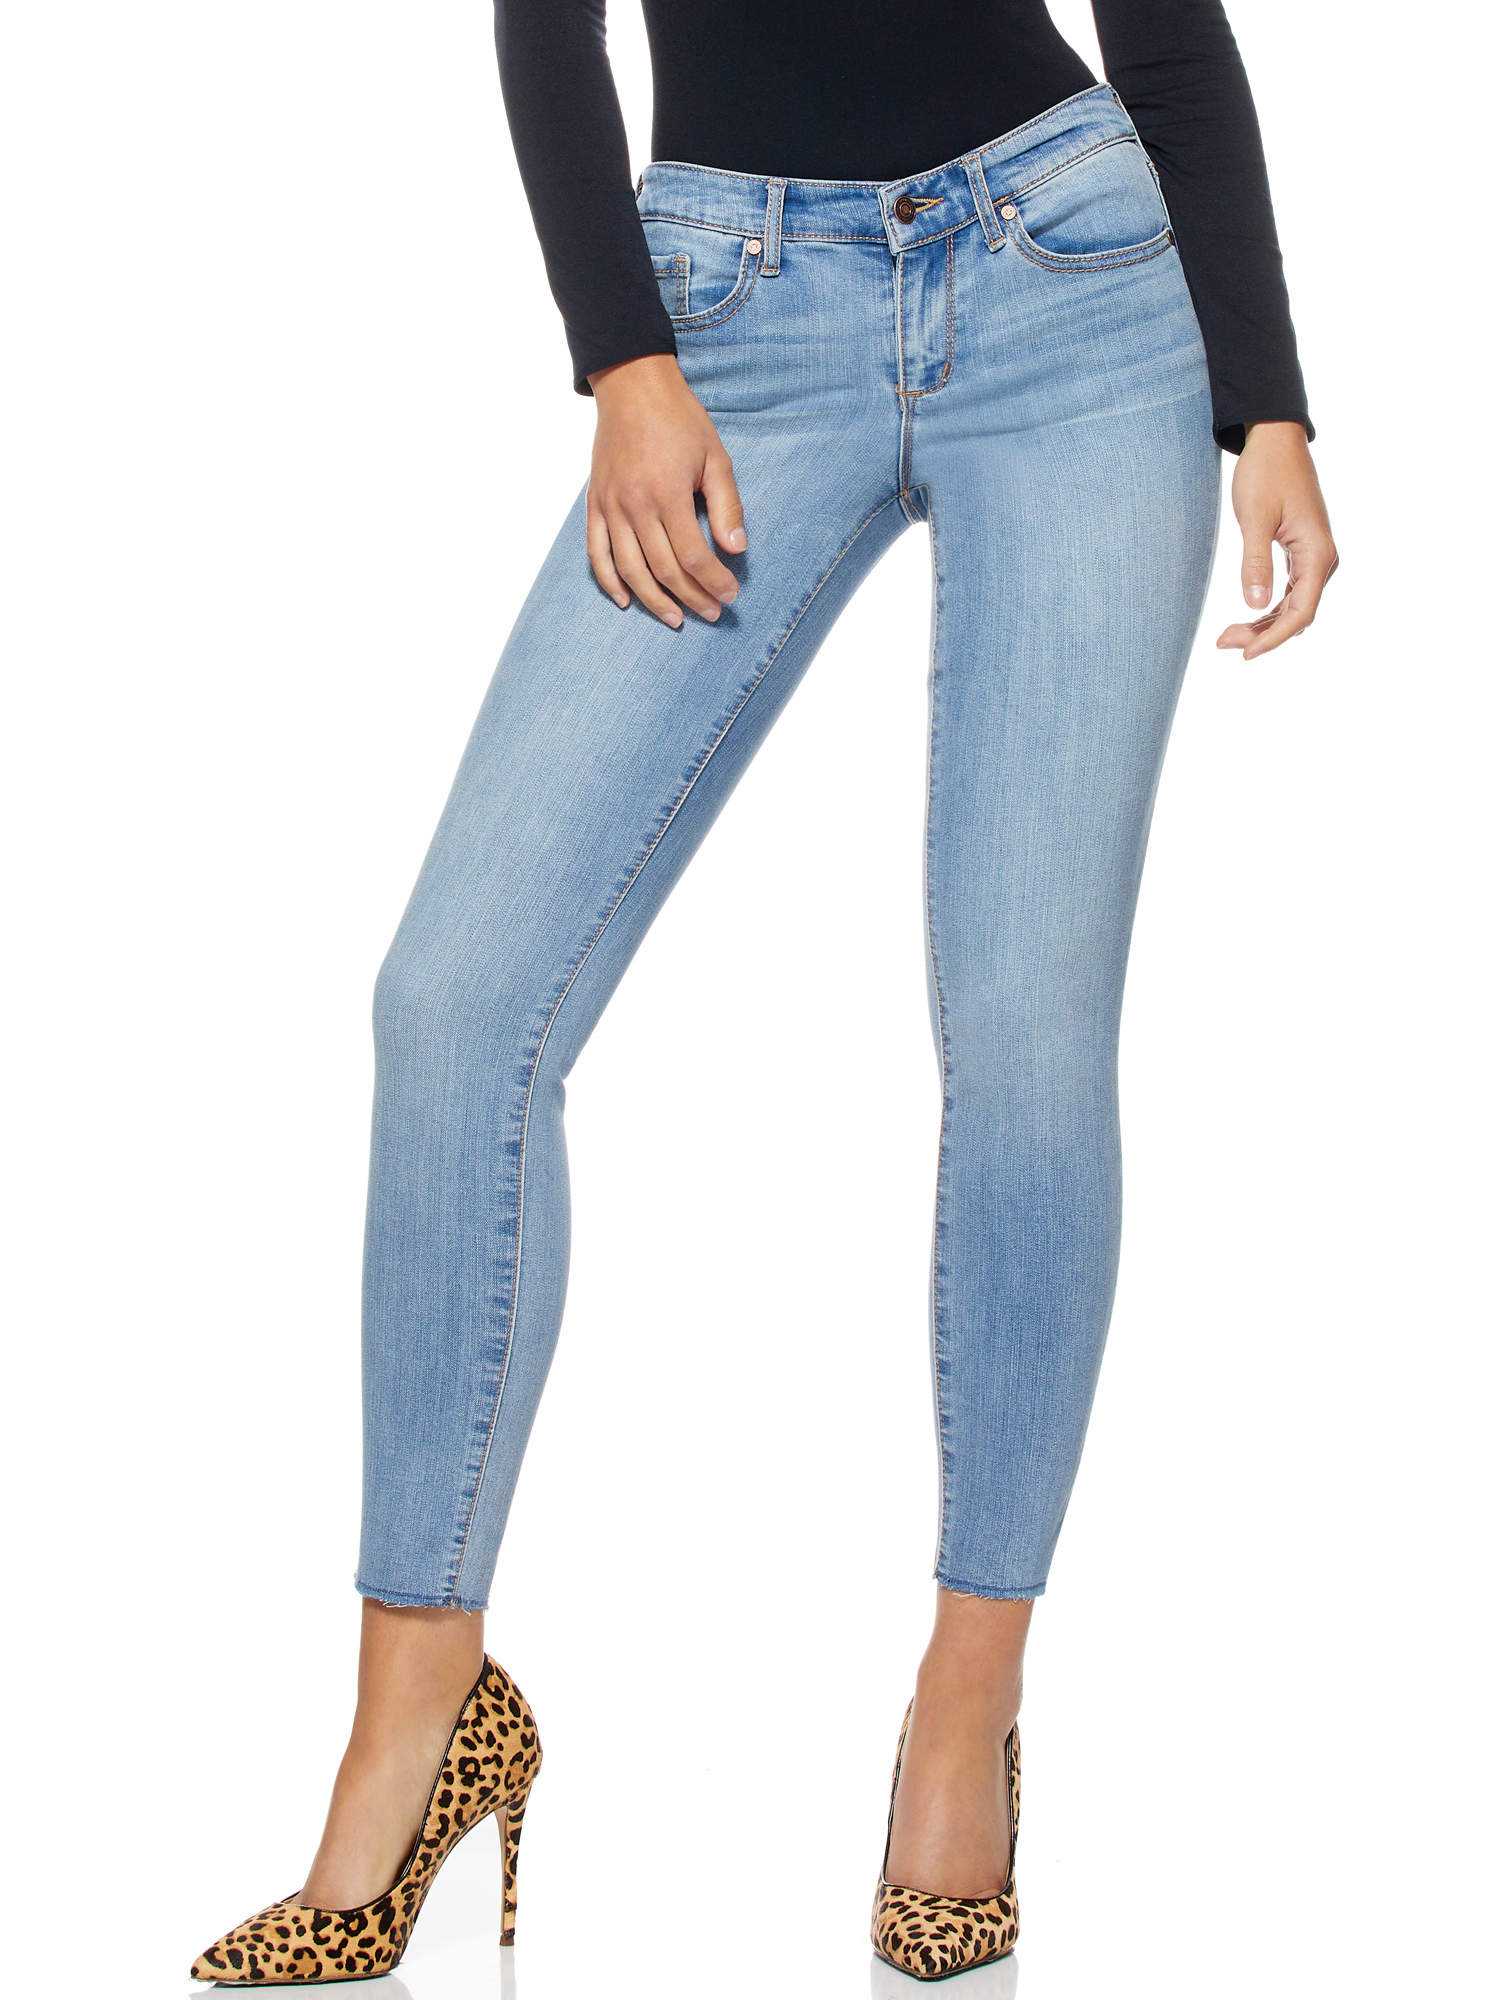 Sofia Jeans Women's Sofia Skinny Mid Rise Ankle Jeans - image 1 of 7